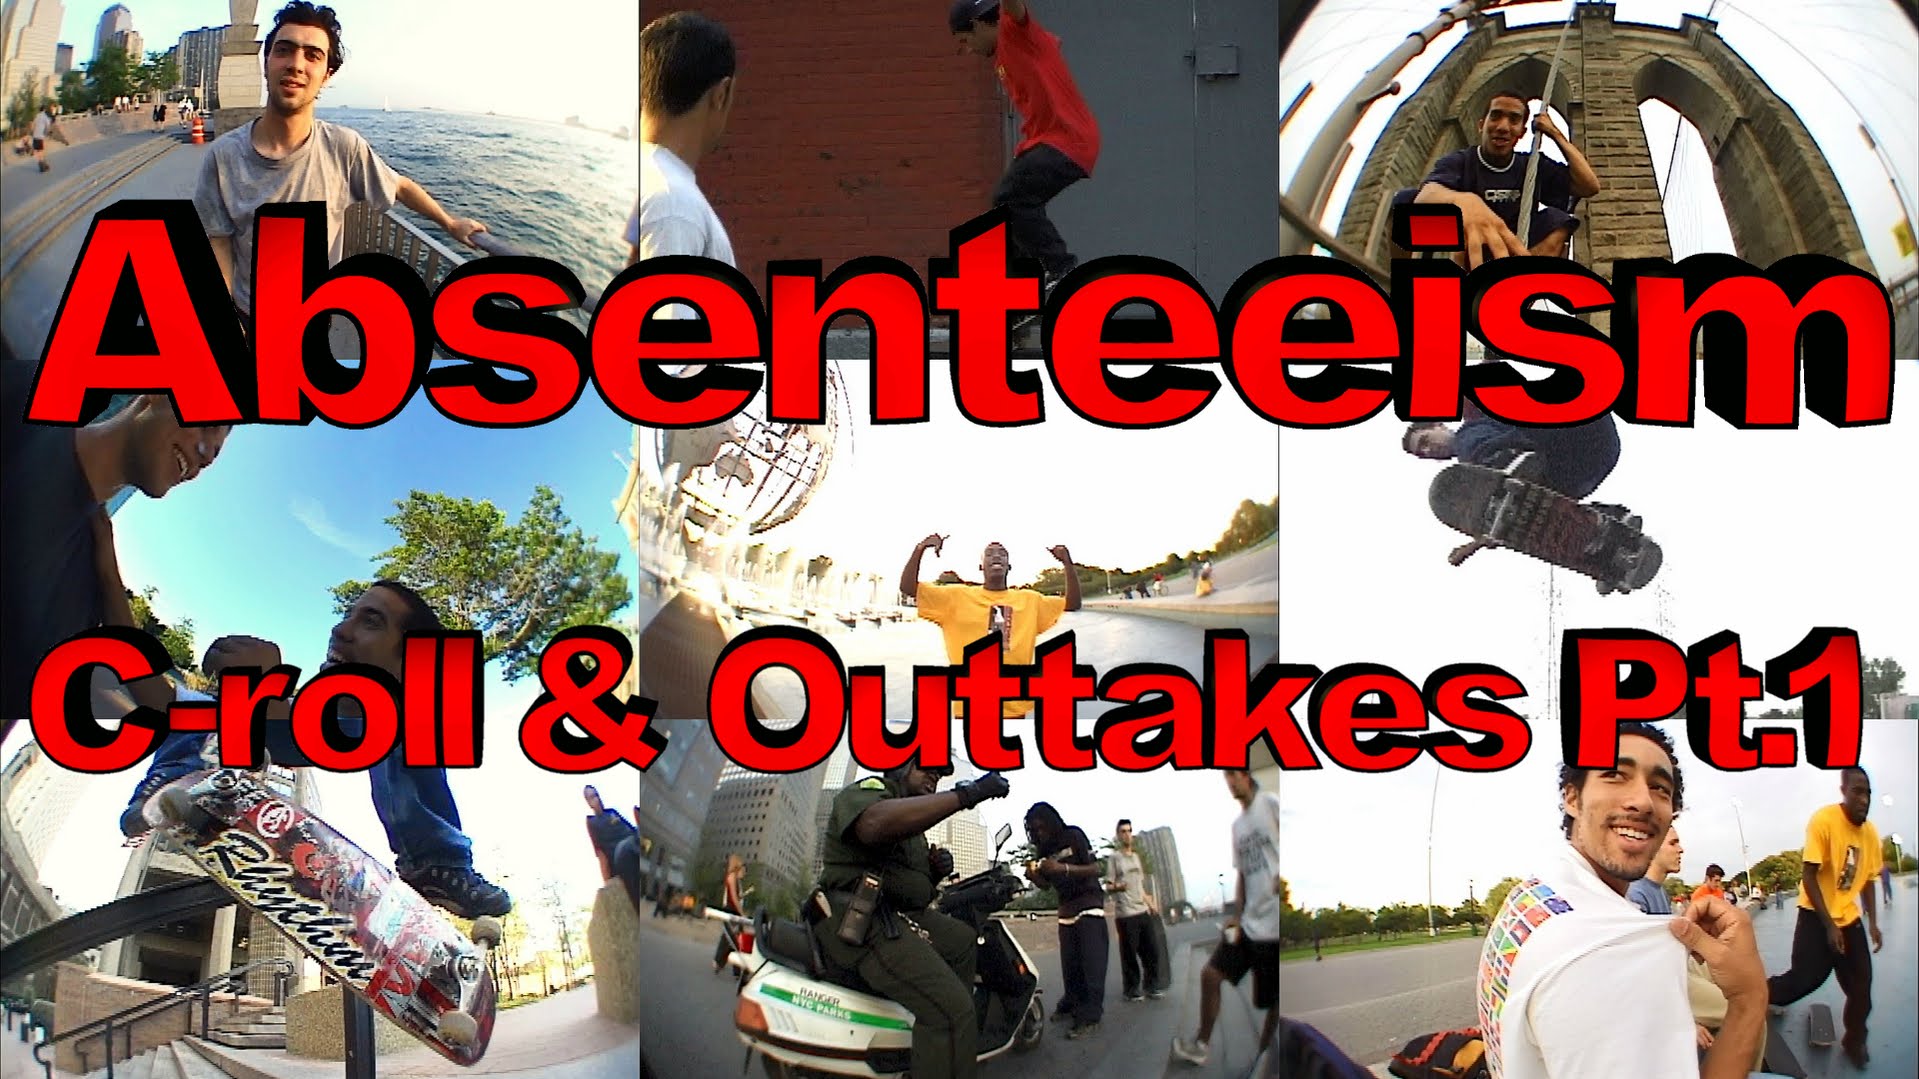 Absenteeism Pt. 1 – C-roll & Outtakes (199x)